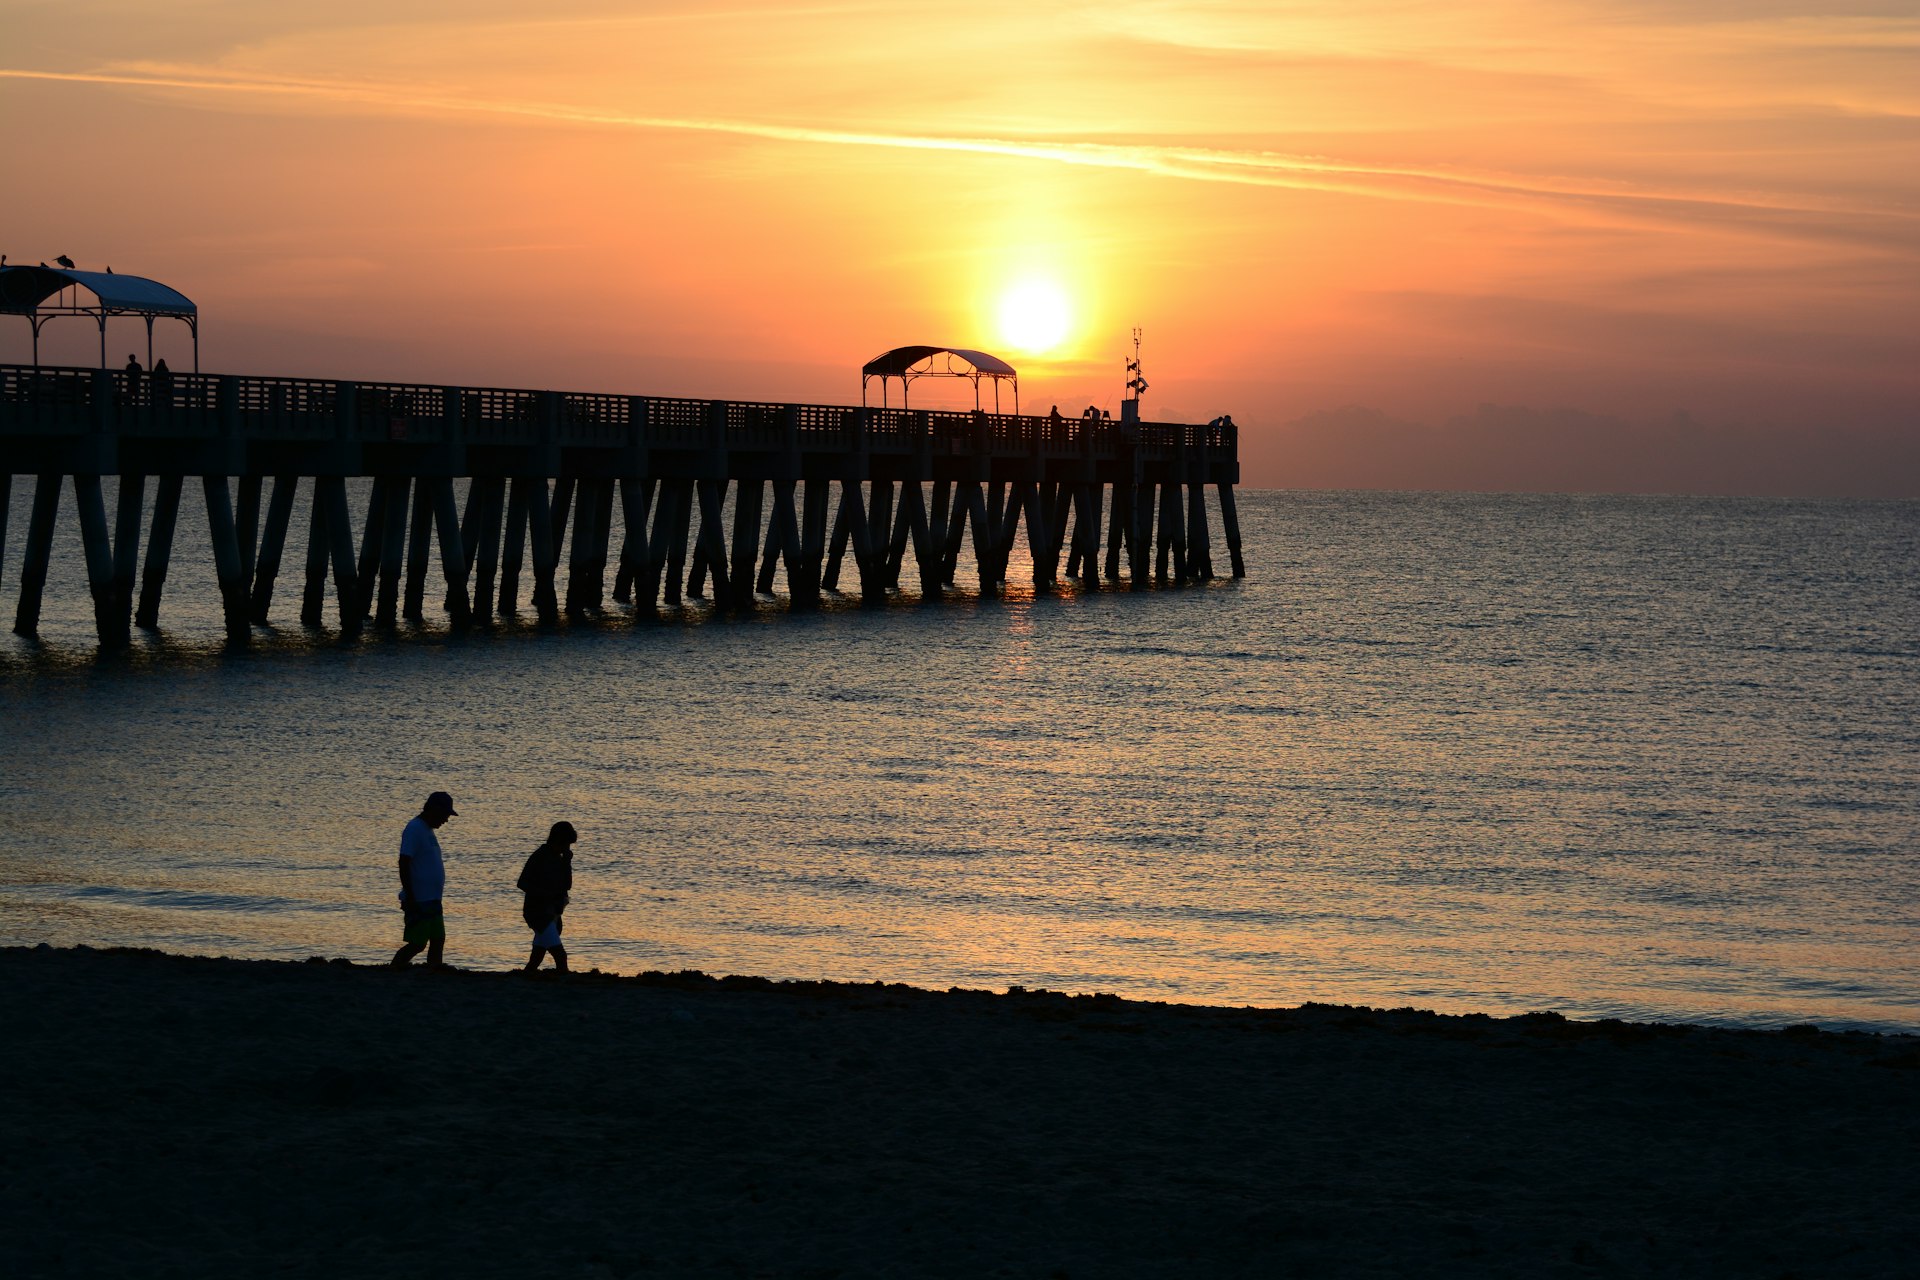 A sunrise over a beach pier with the silhouettes of two adults walking on the beach